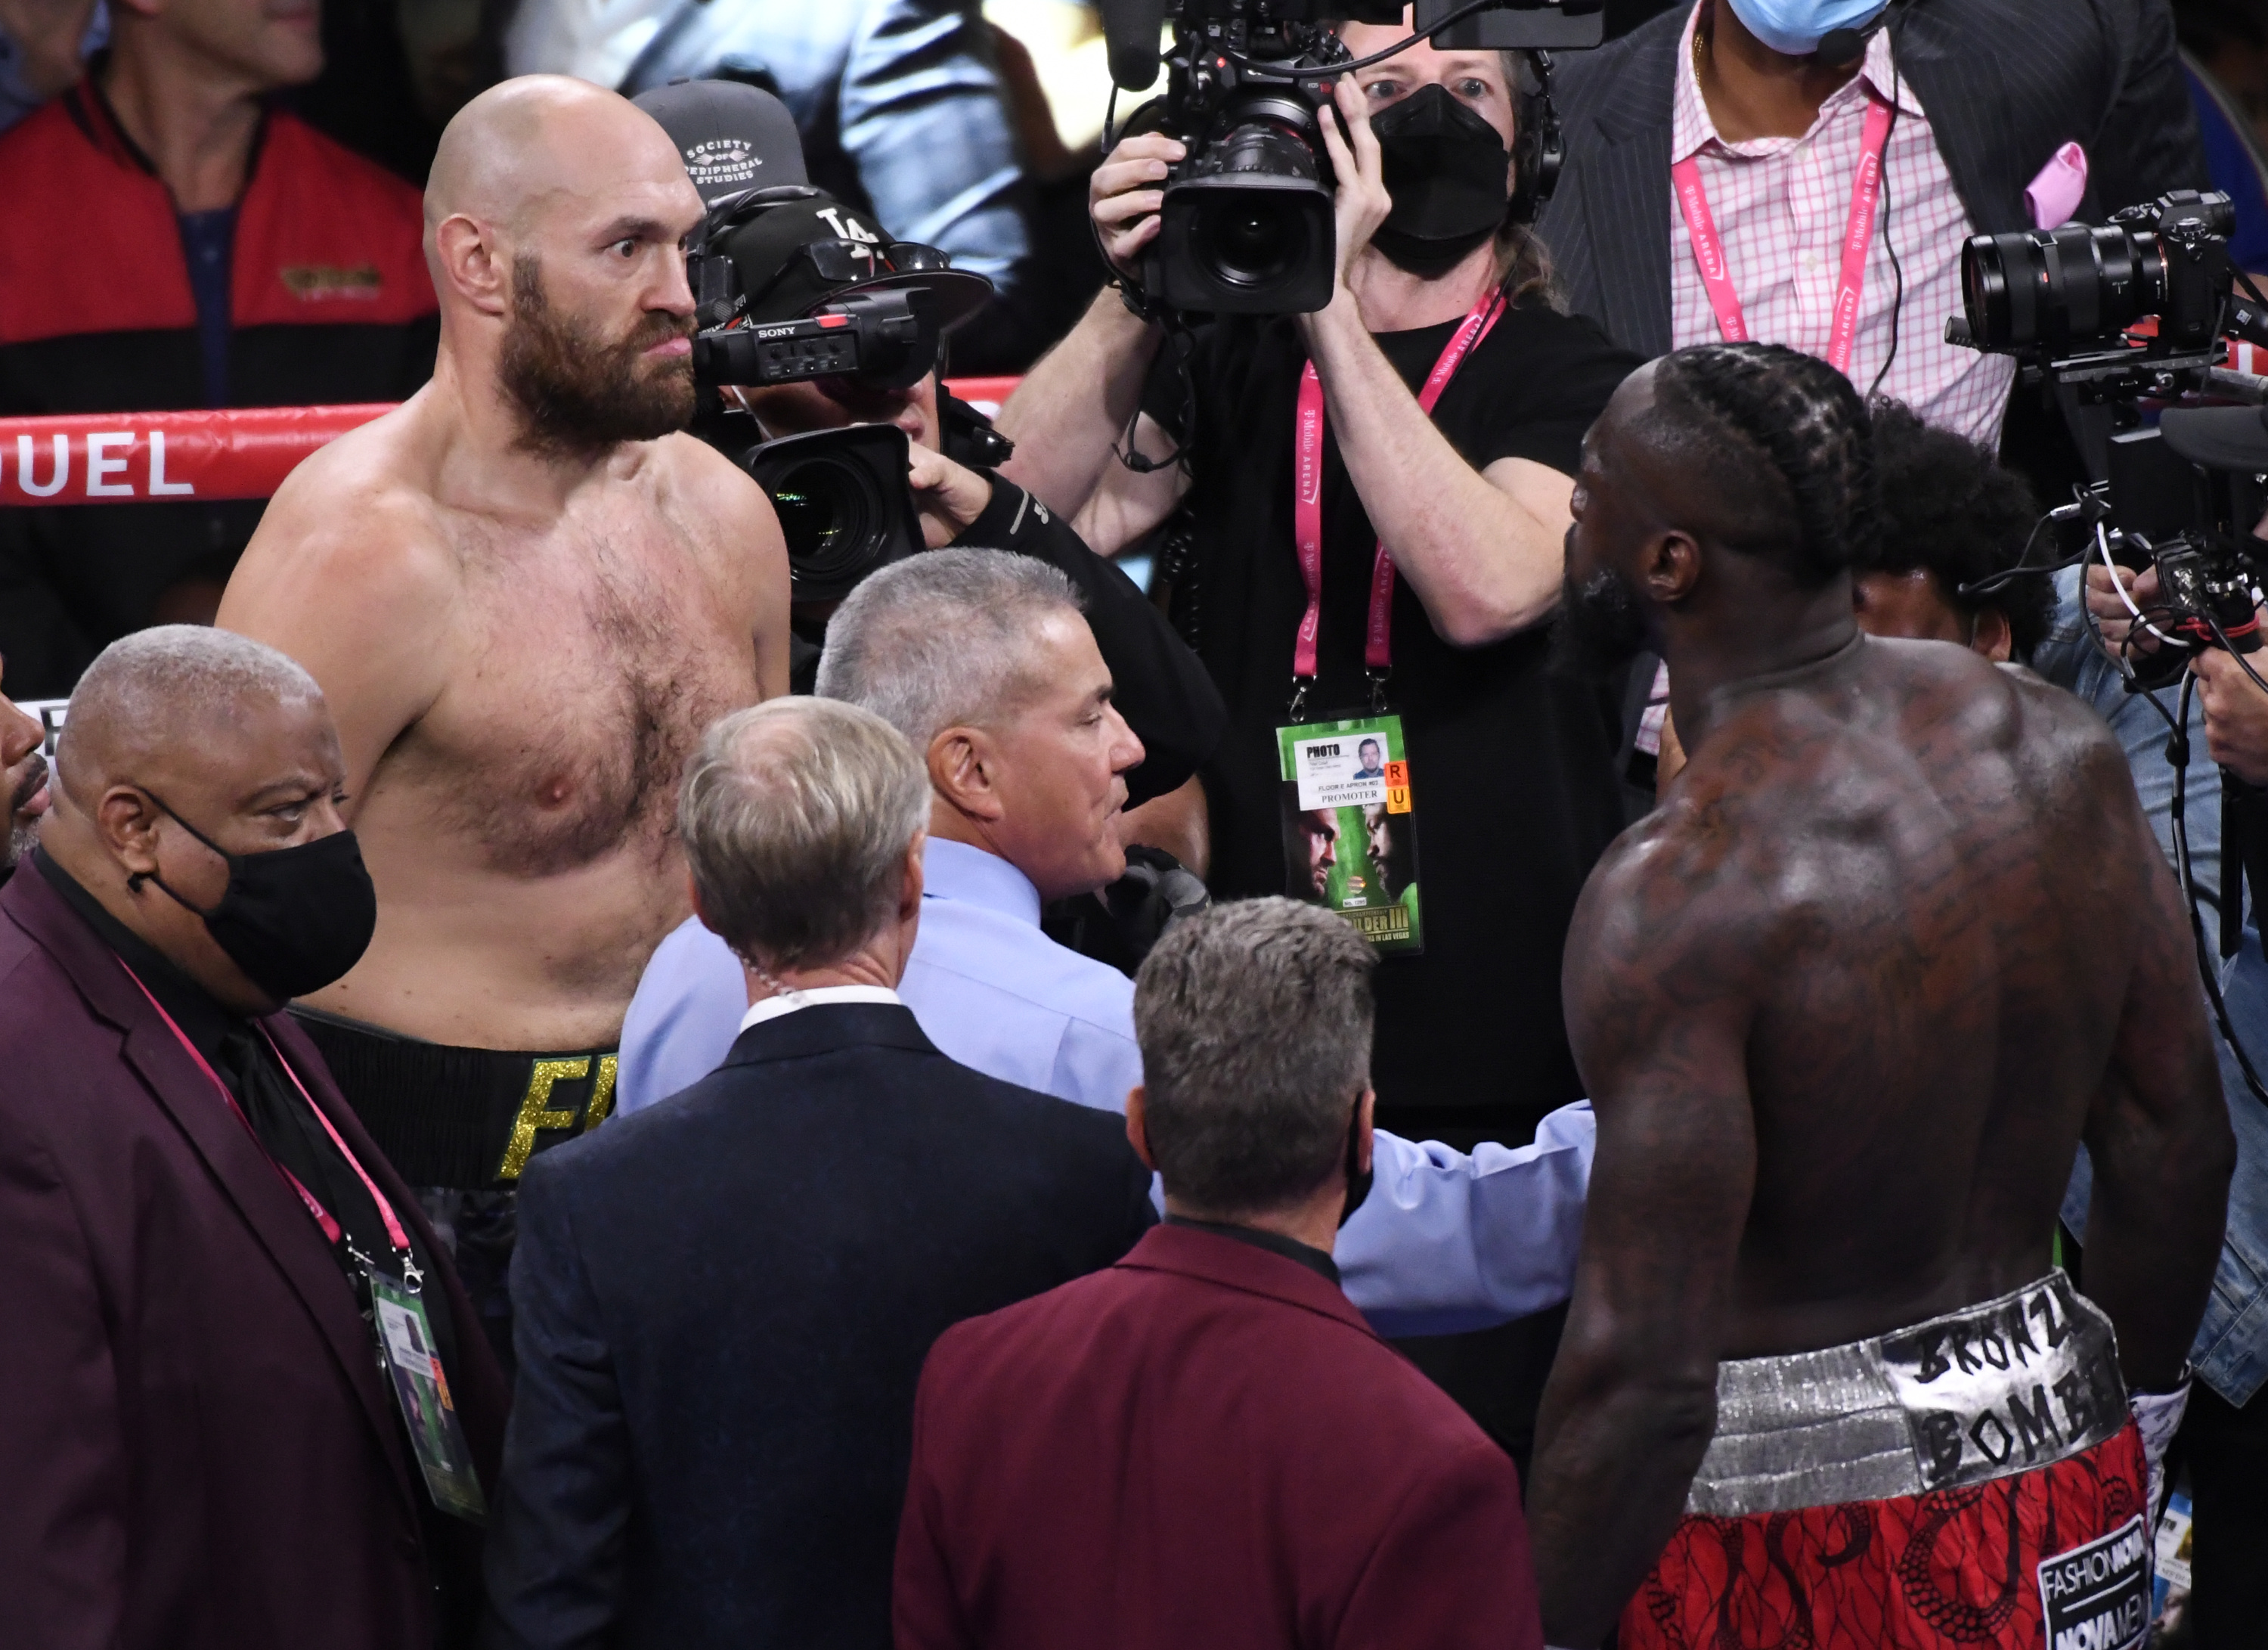 Deontay Wilder and Tyson Fury face off ahead of their October 9th PPV bout.